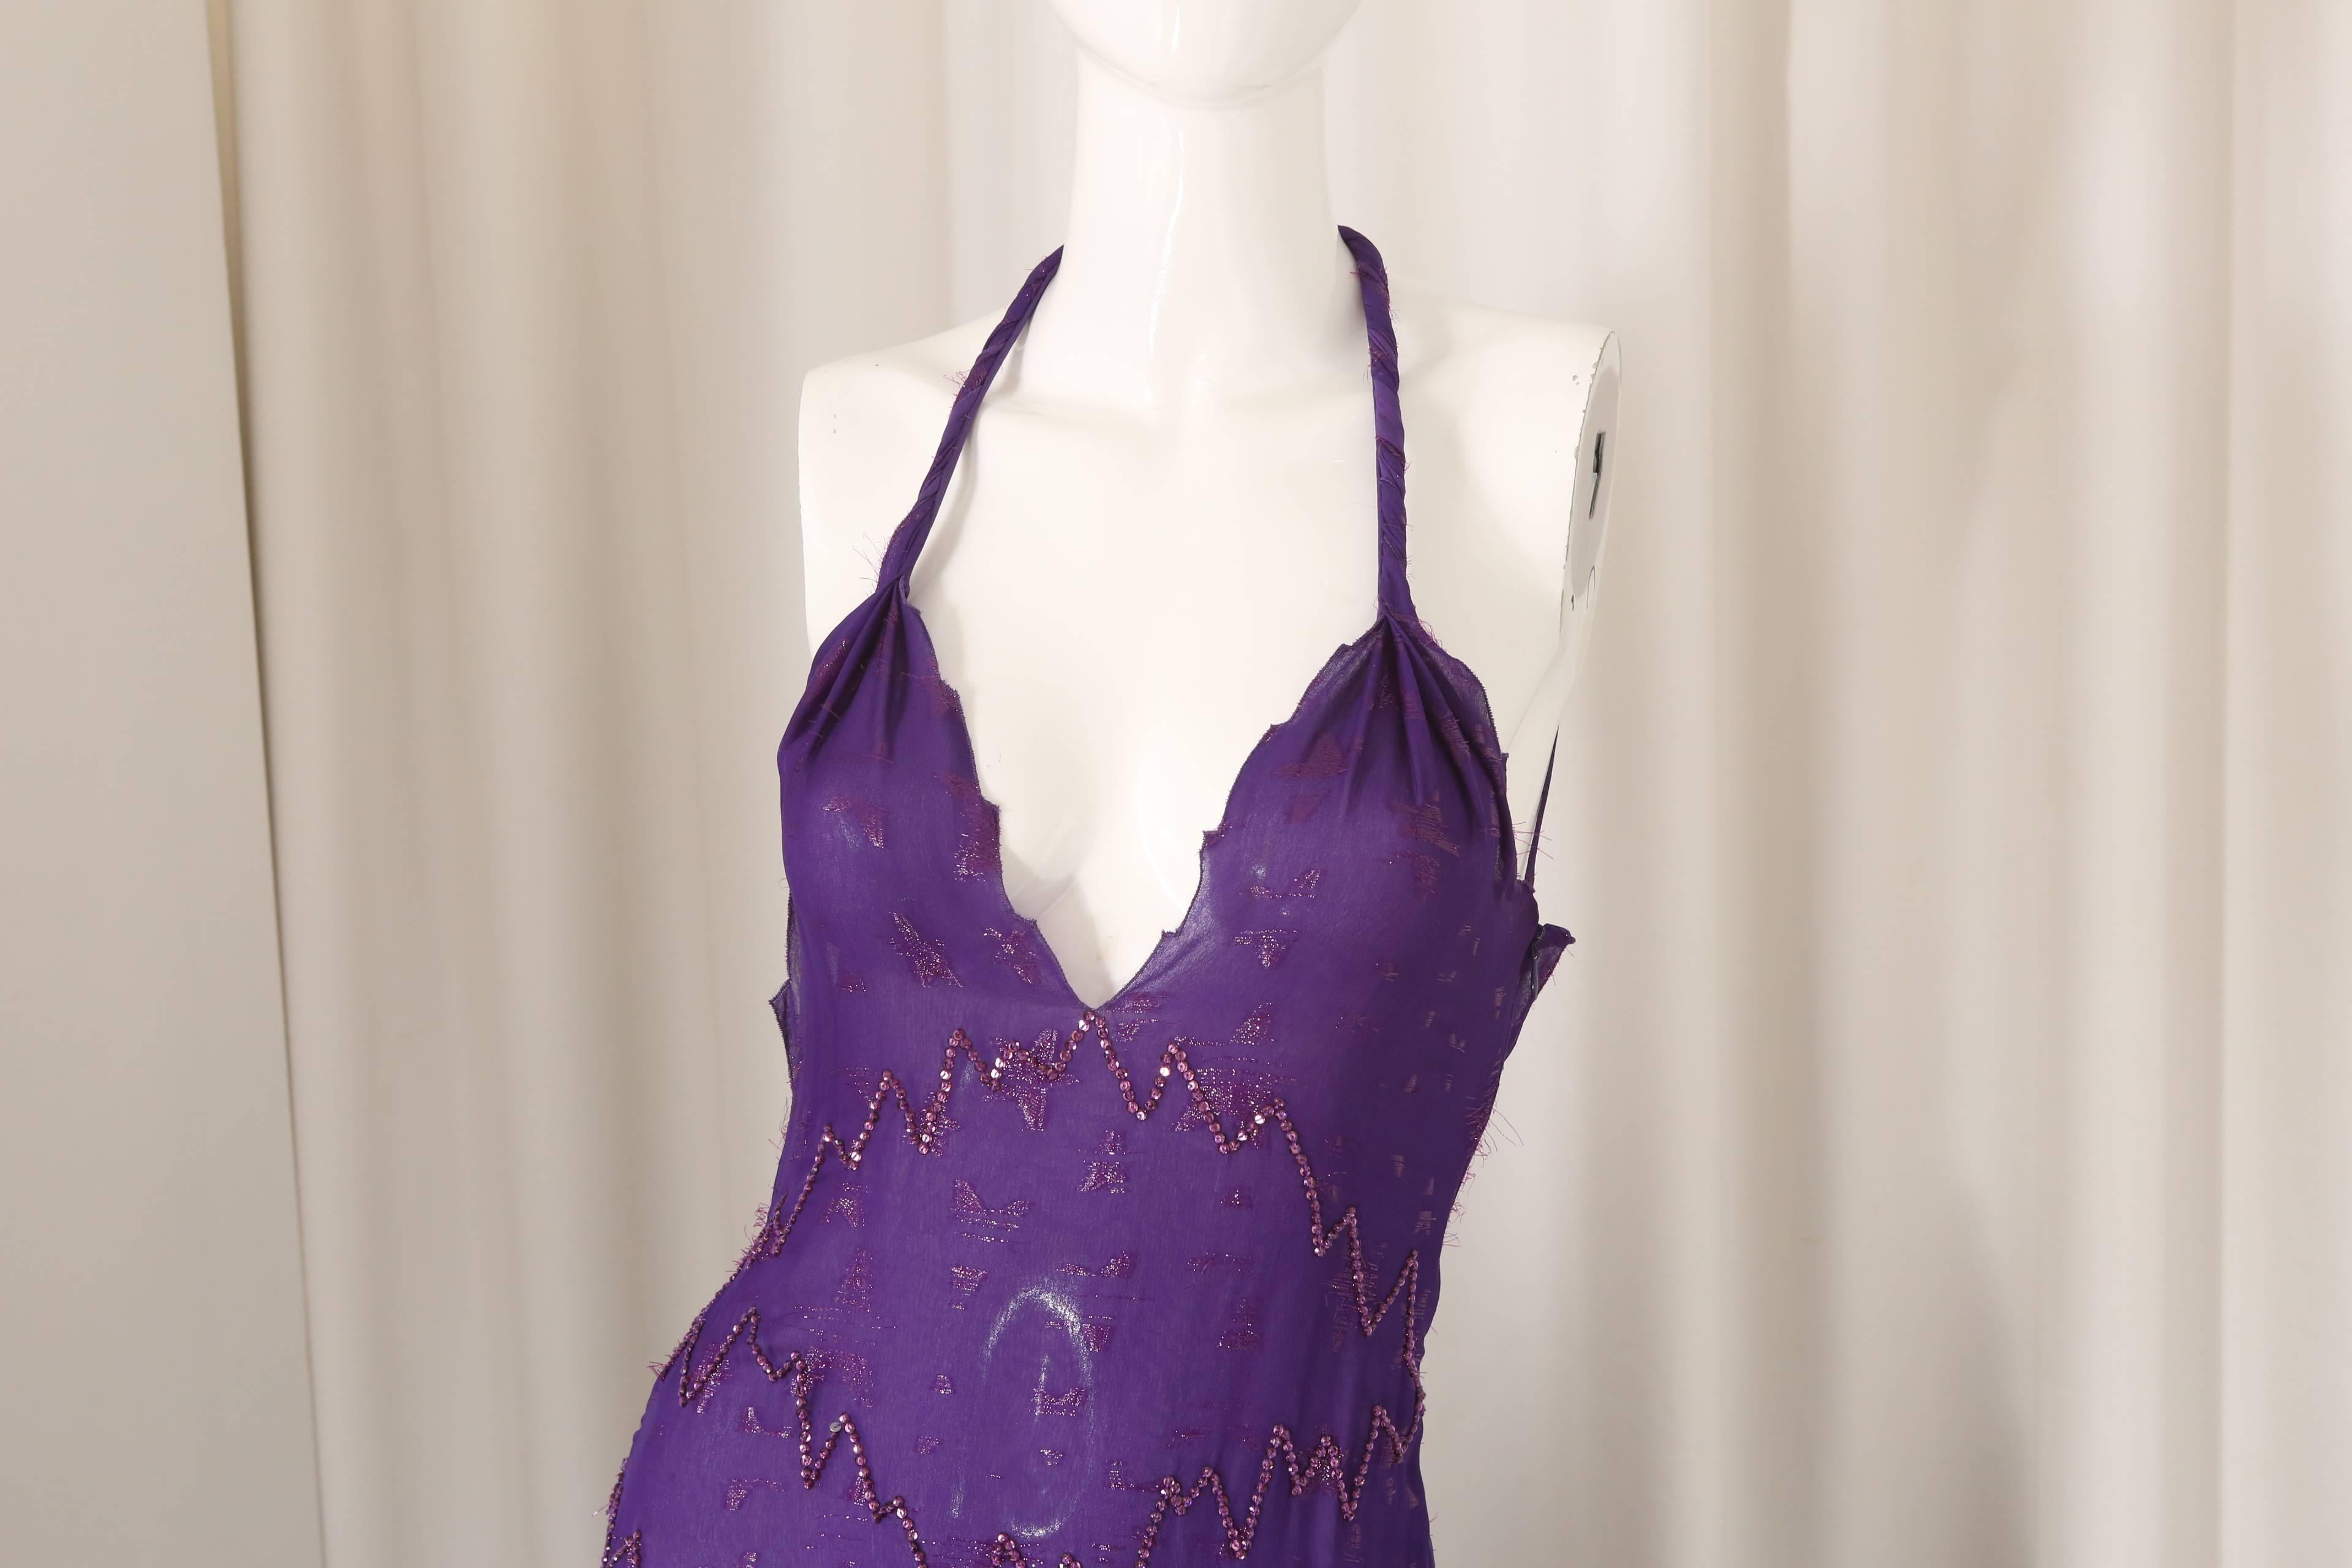 Gianni Versace purple embellished gown with low back, two front slits and straps on the back shoulder. Zig-zag beading and metallic threading. 